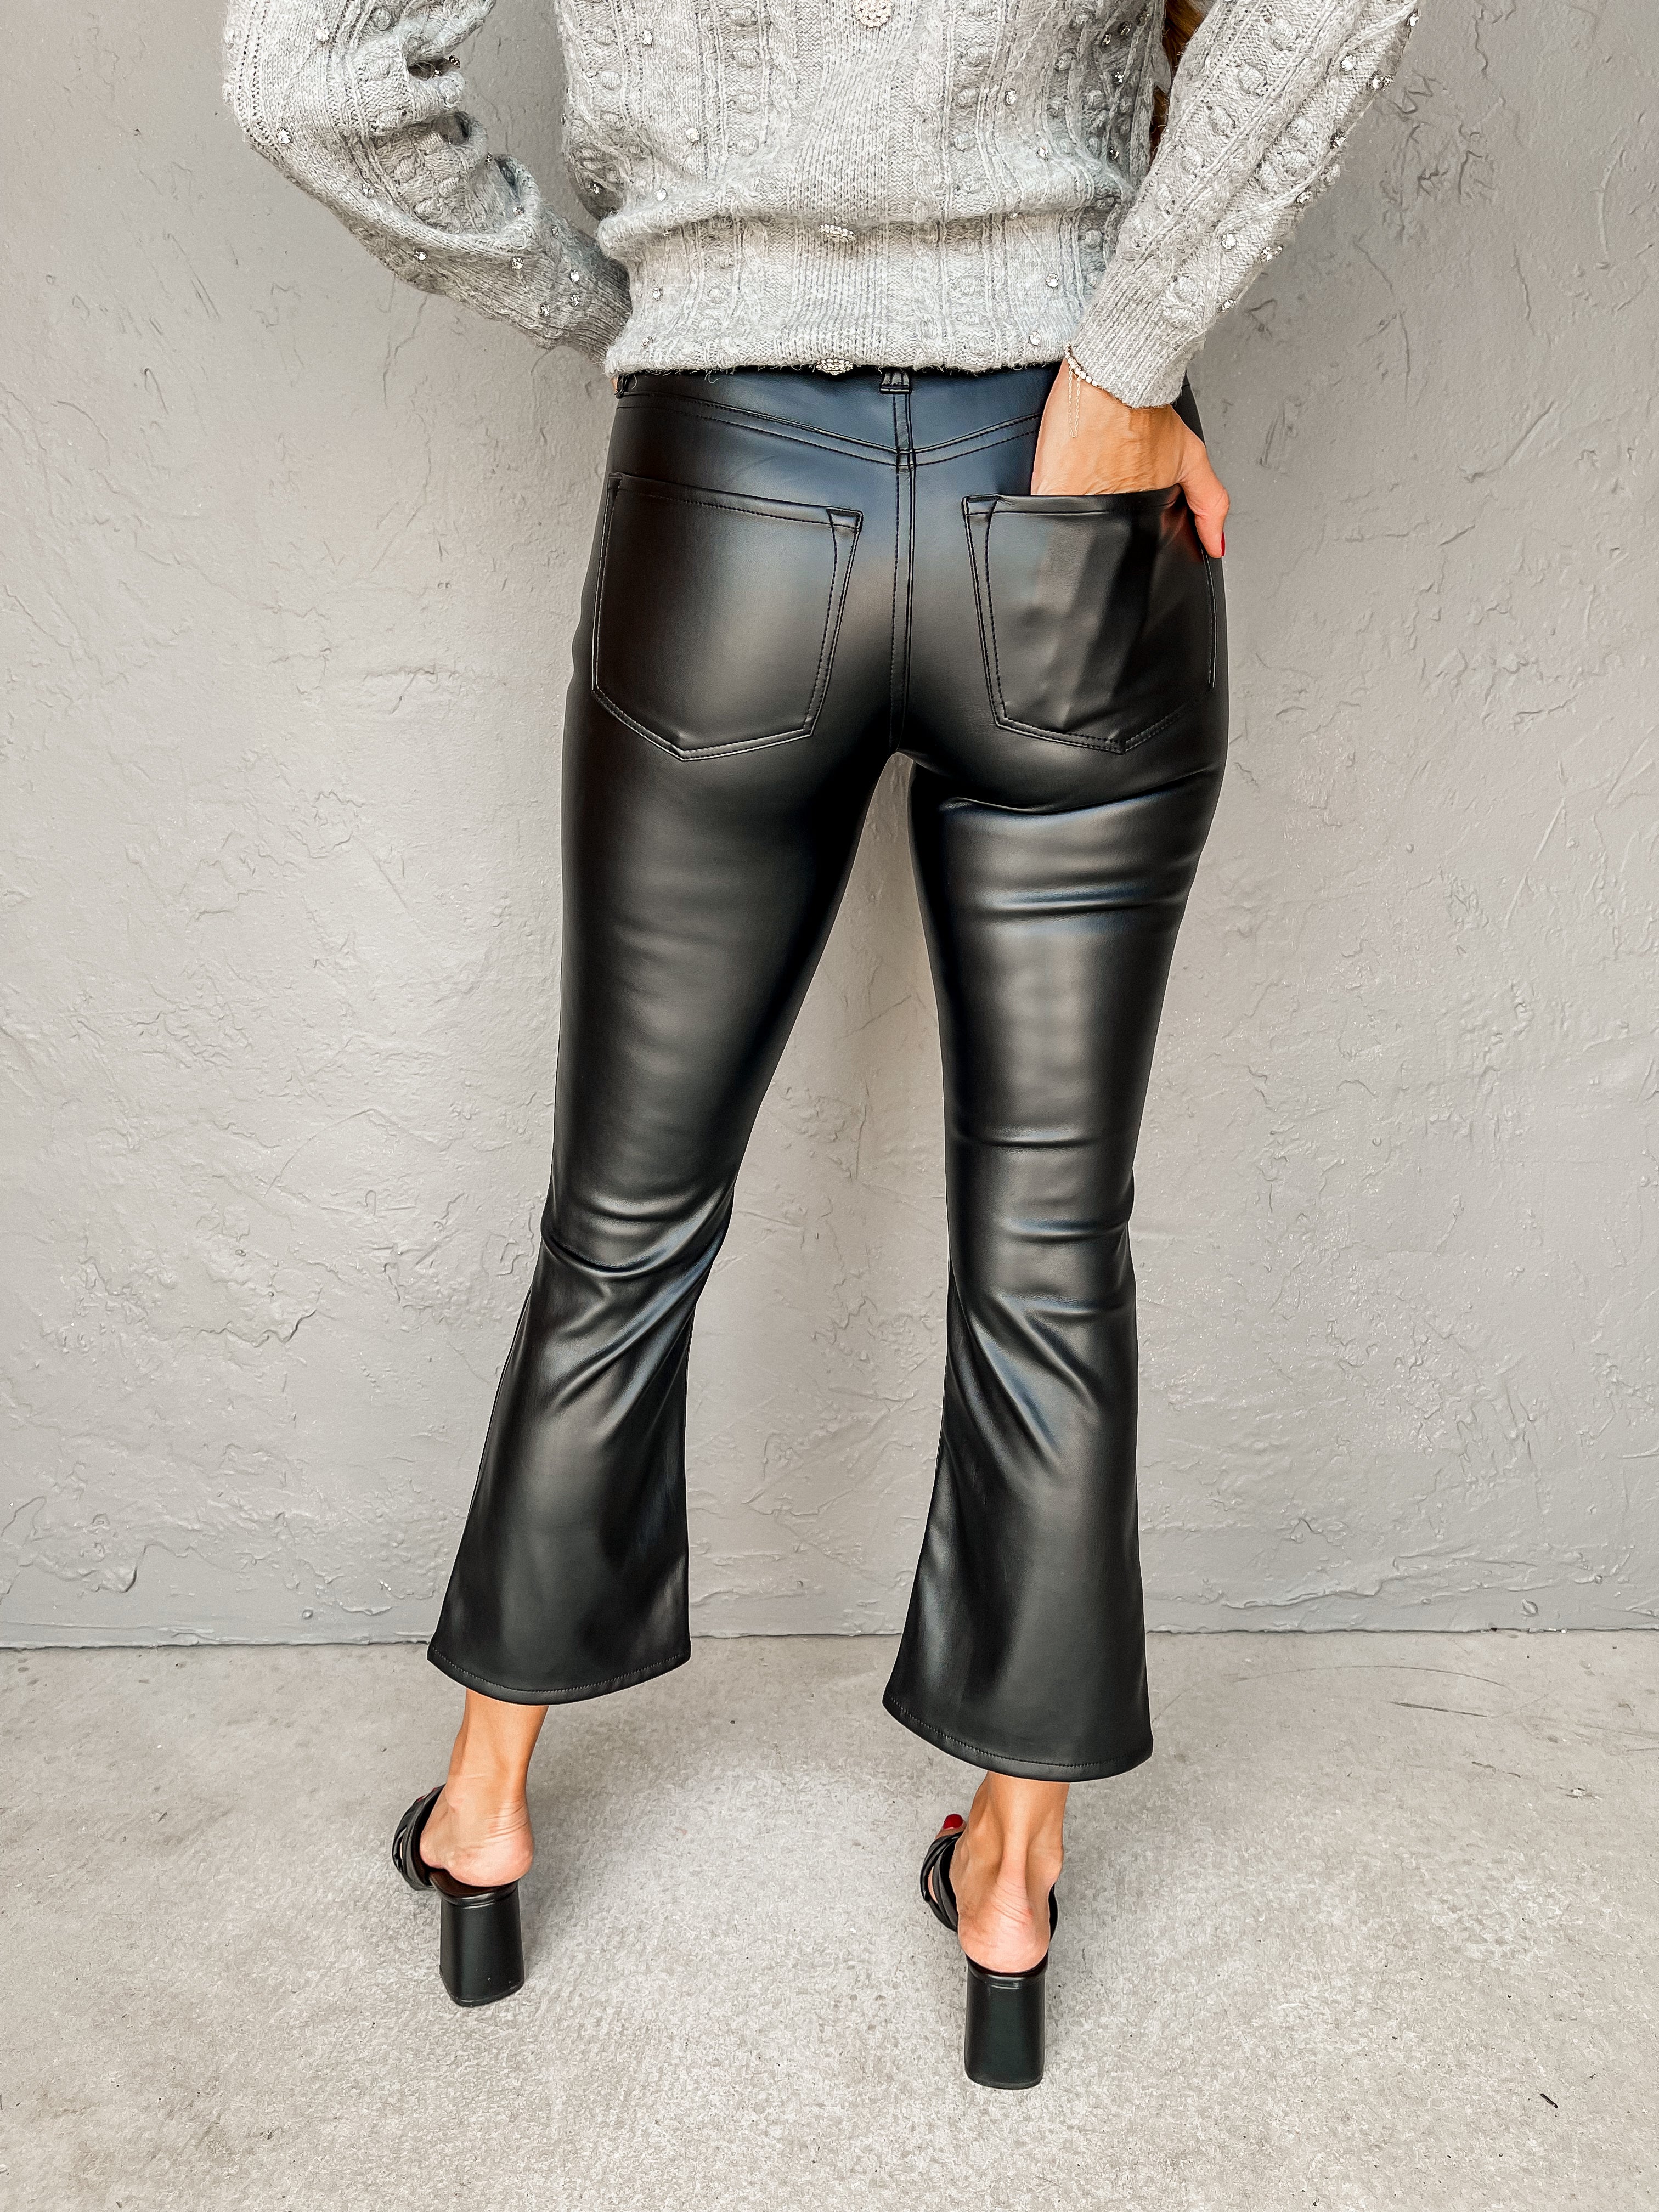 Your Closet Called. It Said It Needs These Faux-Leather Jeans - Sponsored  Post - The Mom Edit